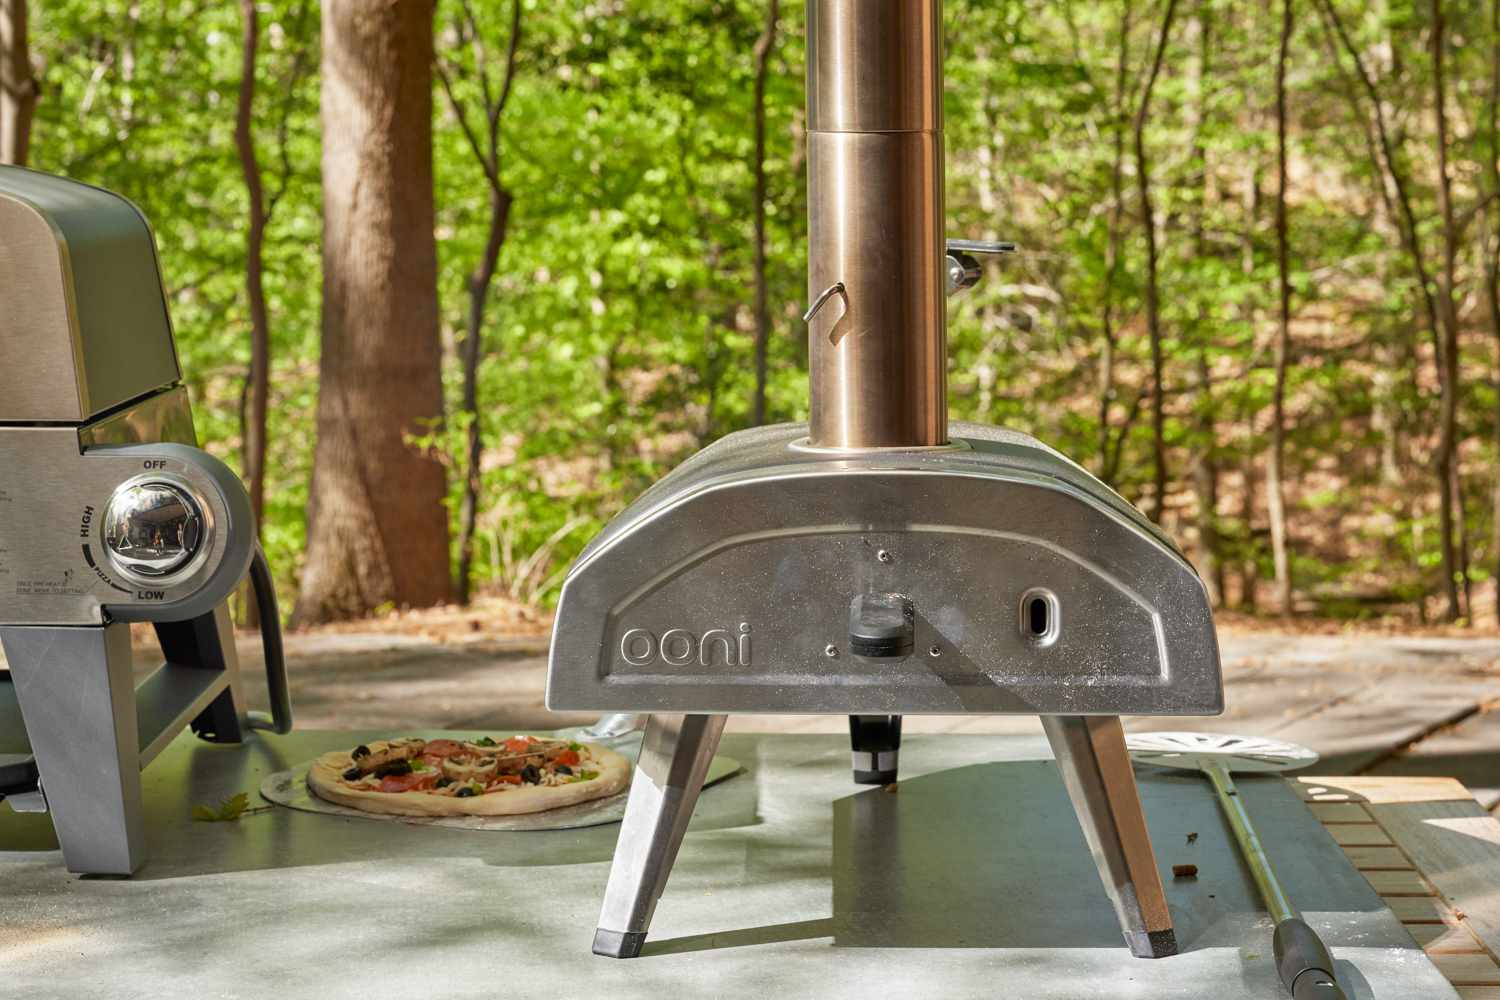 A head-on look at the Ooni Frya oven with its door on